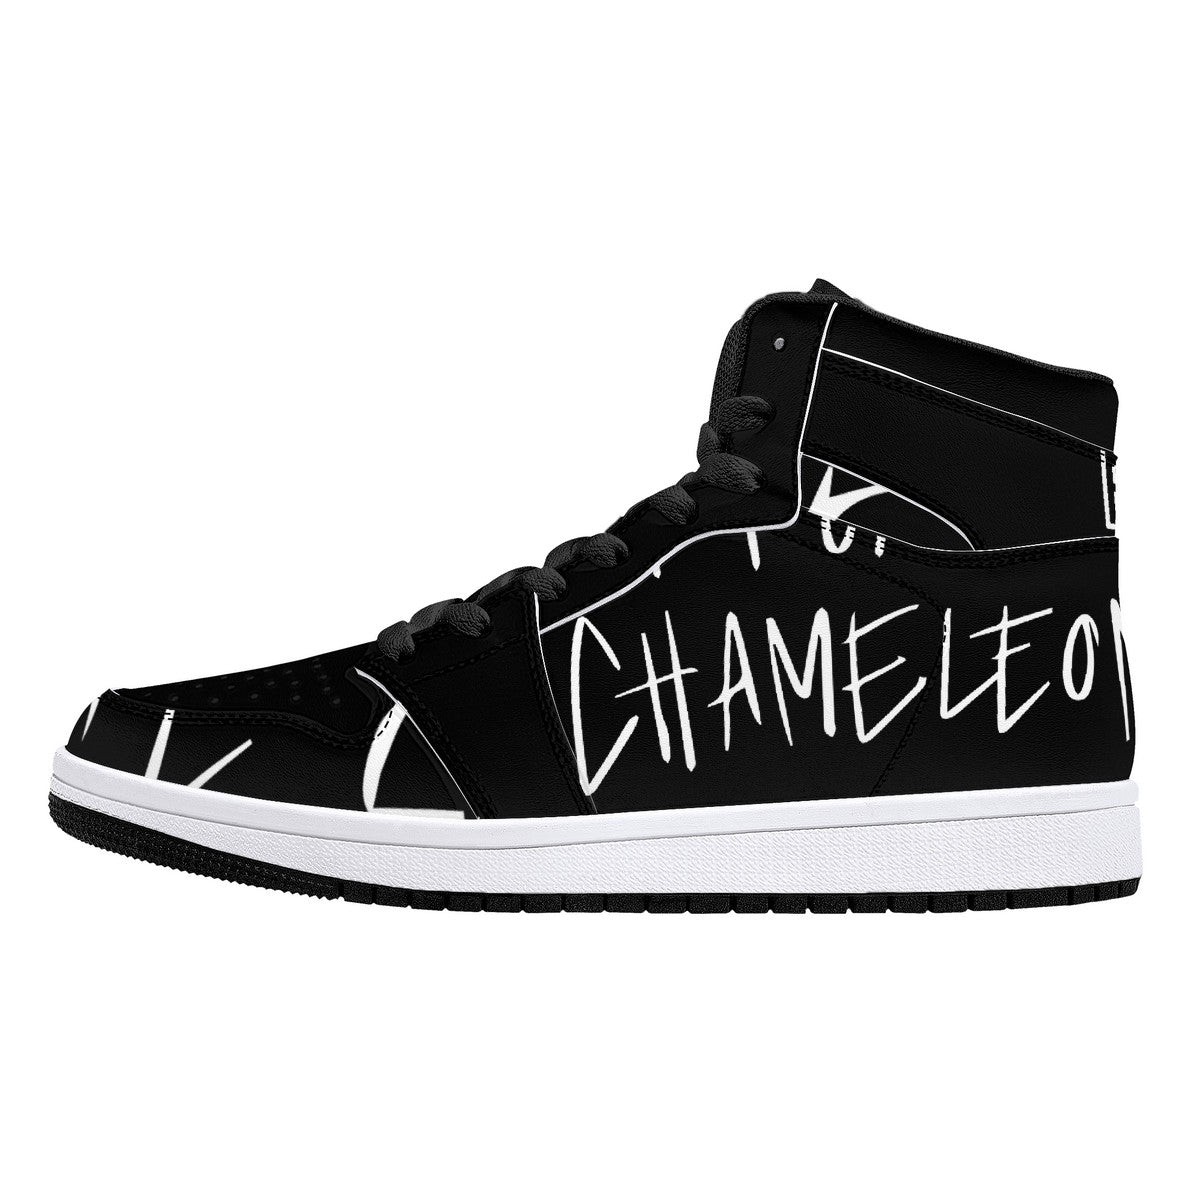 Flex Power | Customized Business Shoes V1 Sneakers